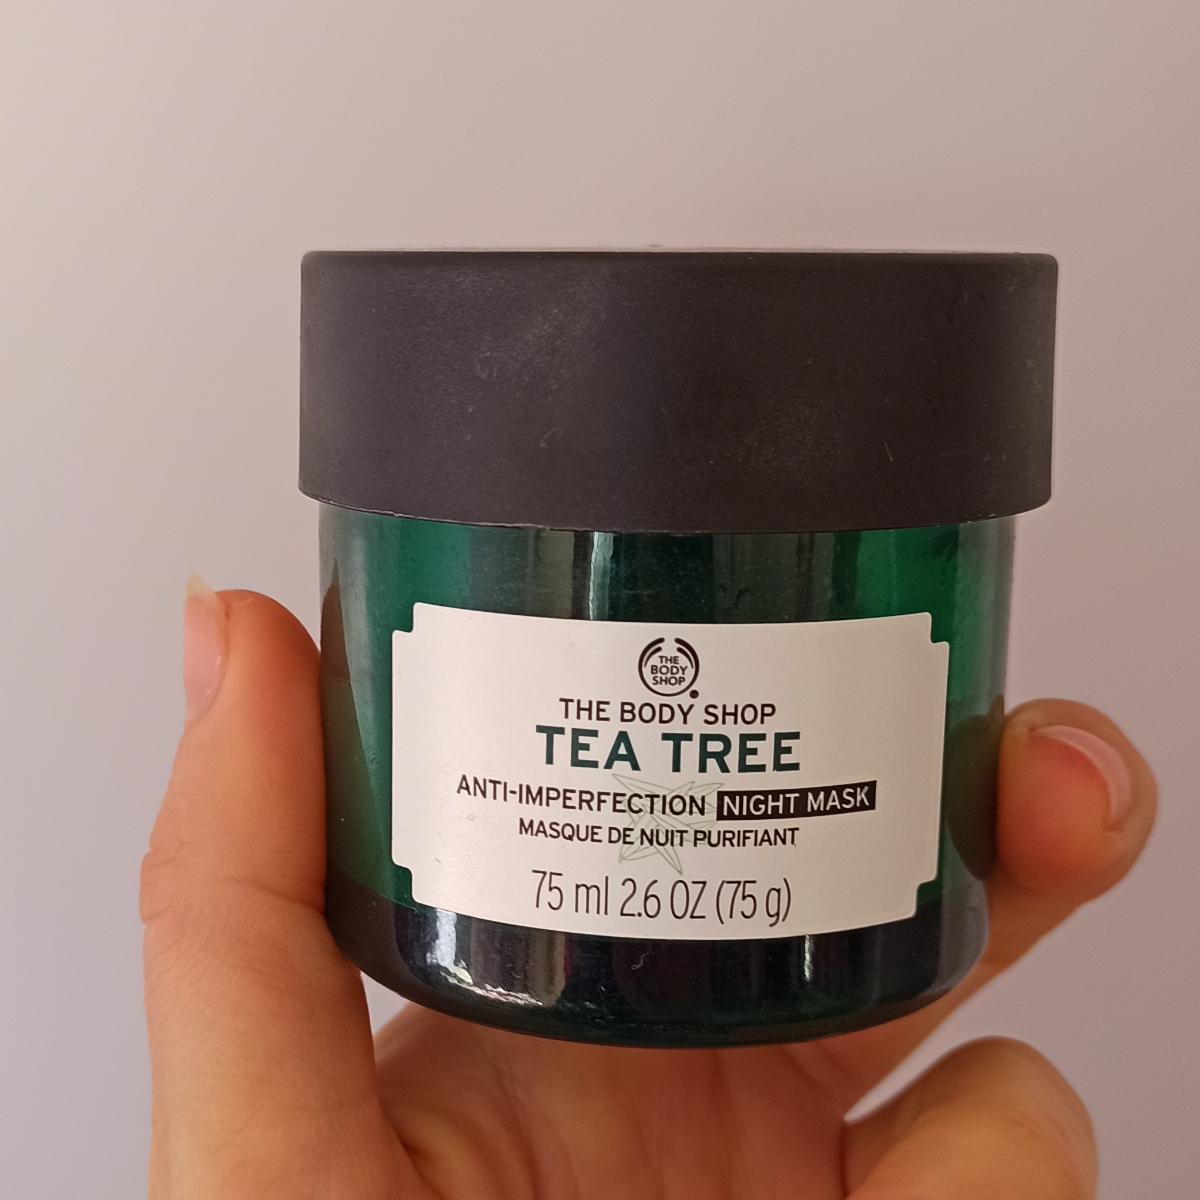 The Body Shop Tea Tree Anti-Imperfection Night Mask Review | abillion